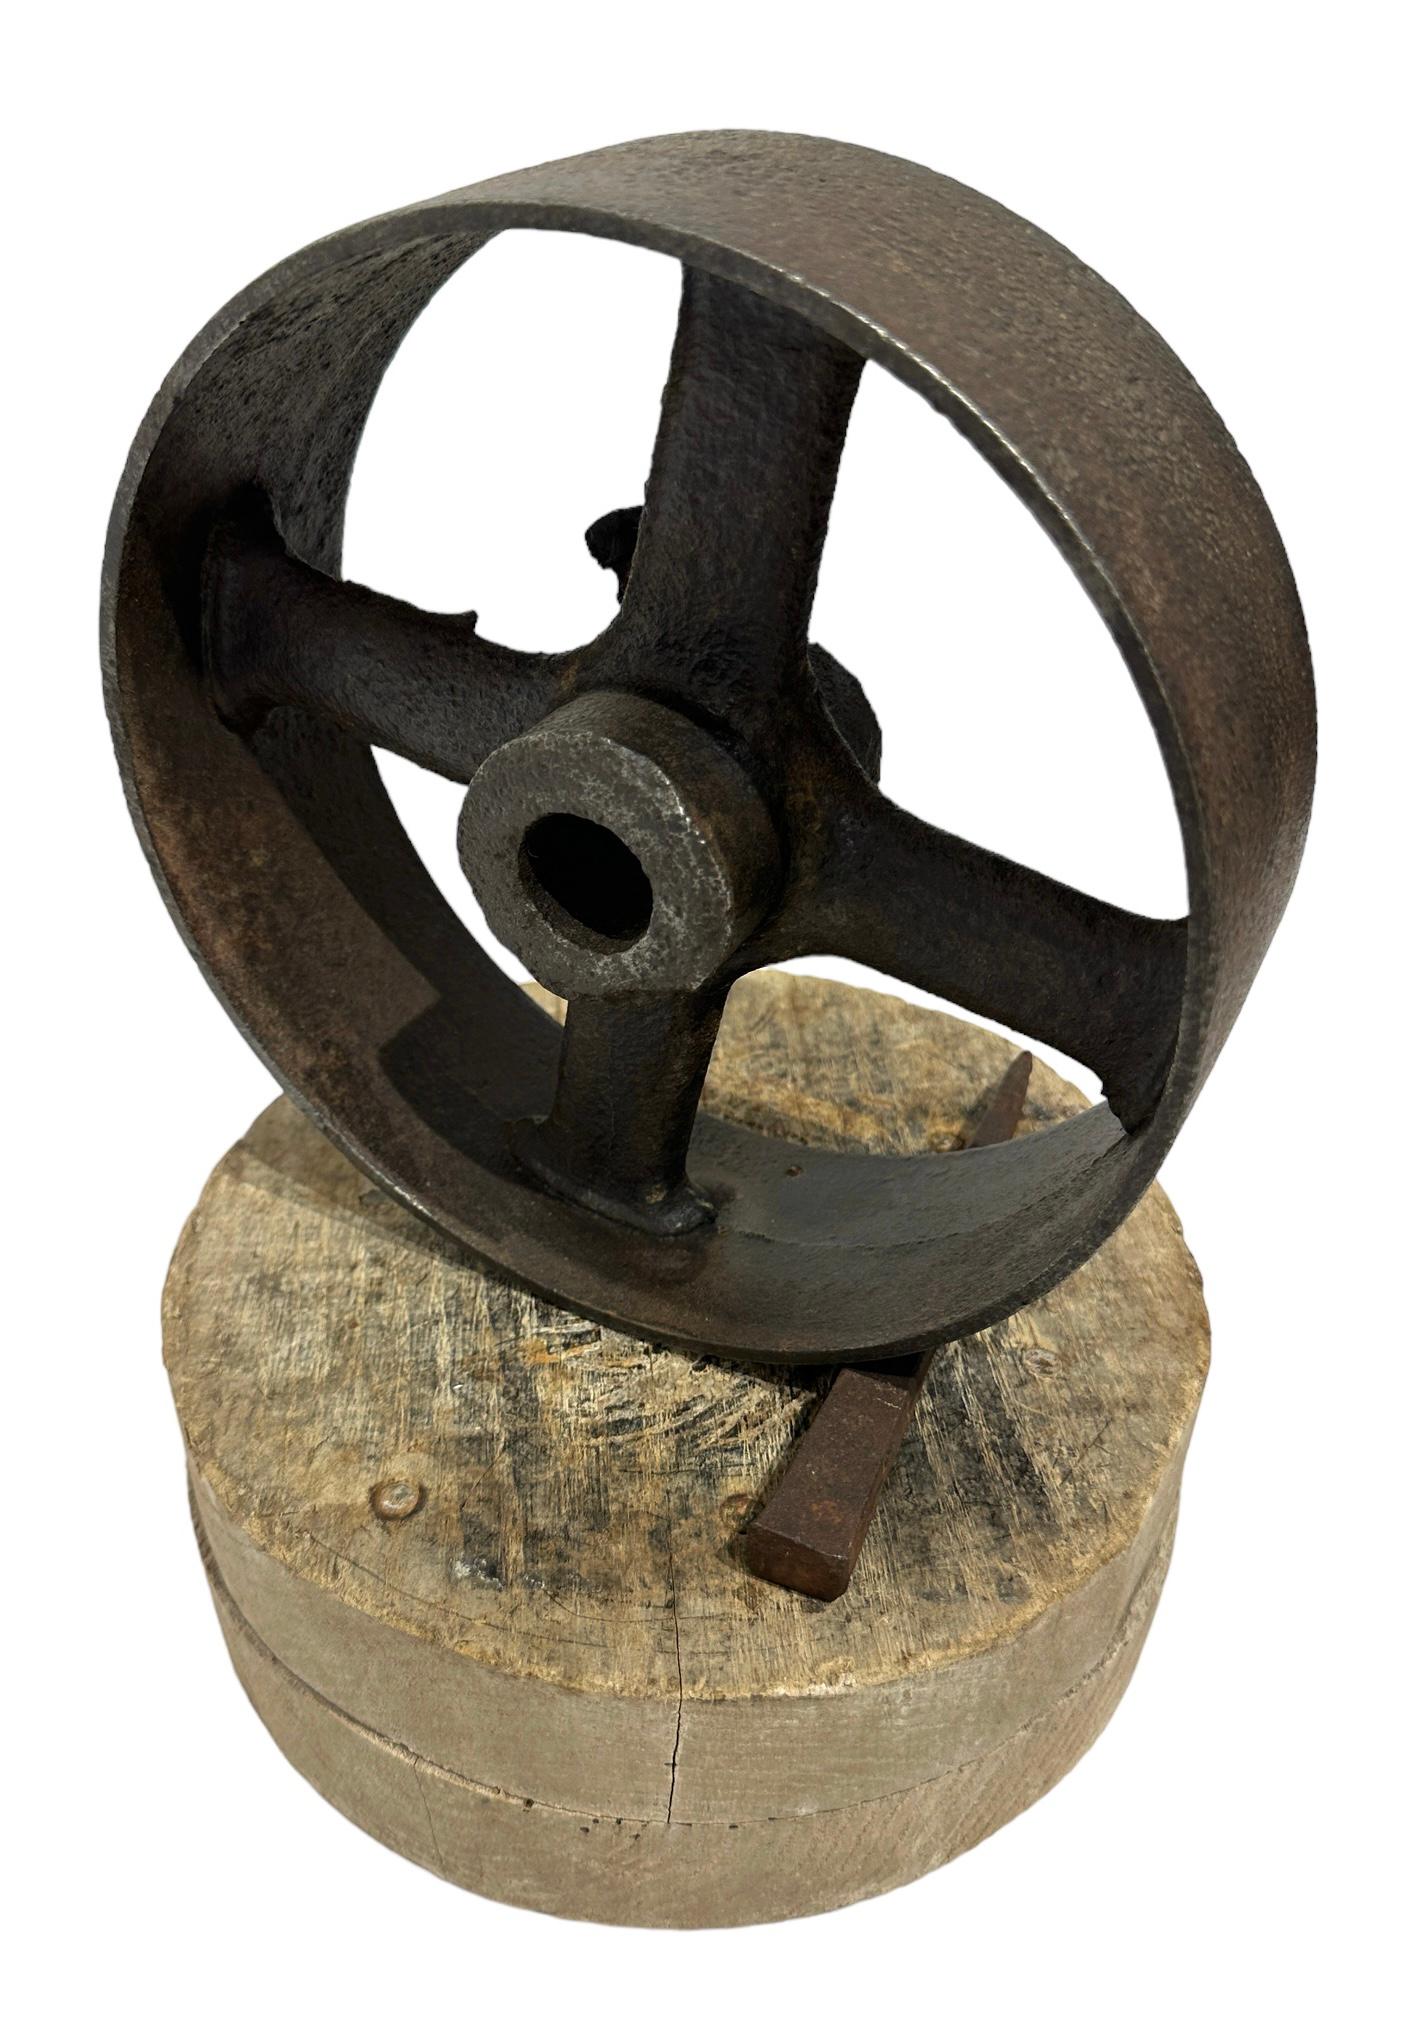 Welded Found and Salvaged Steel with Wooden Industrial Objects